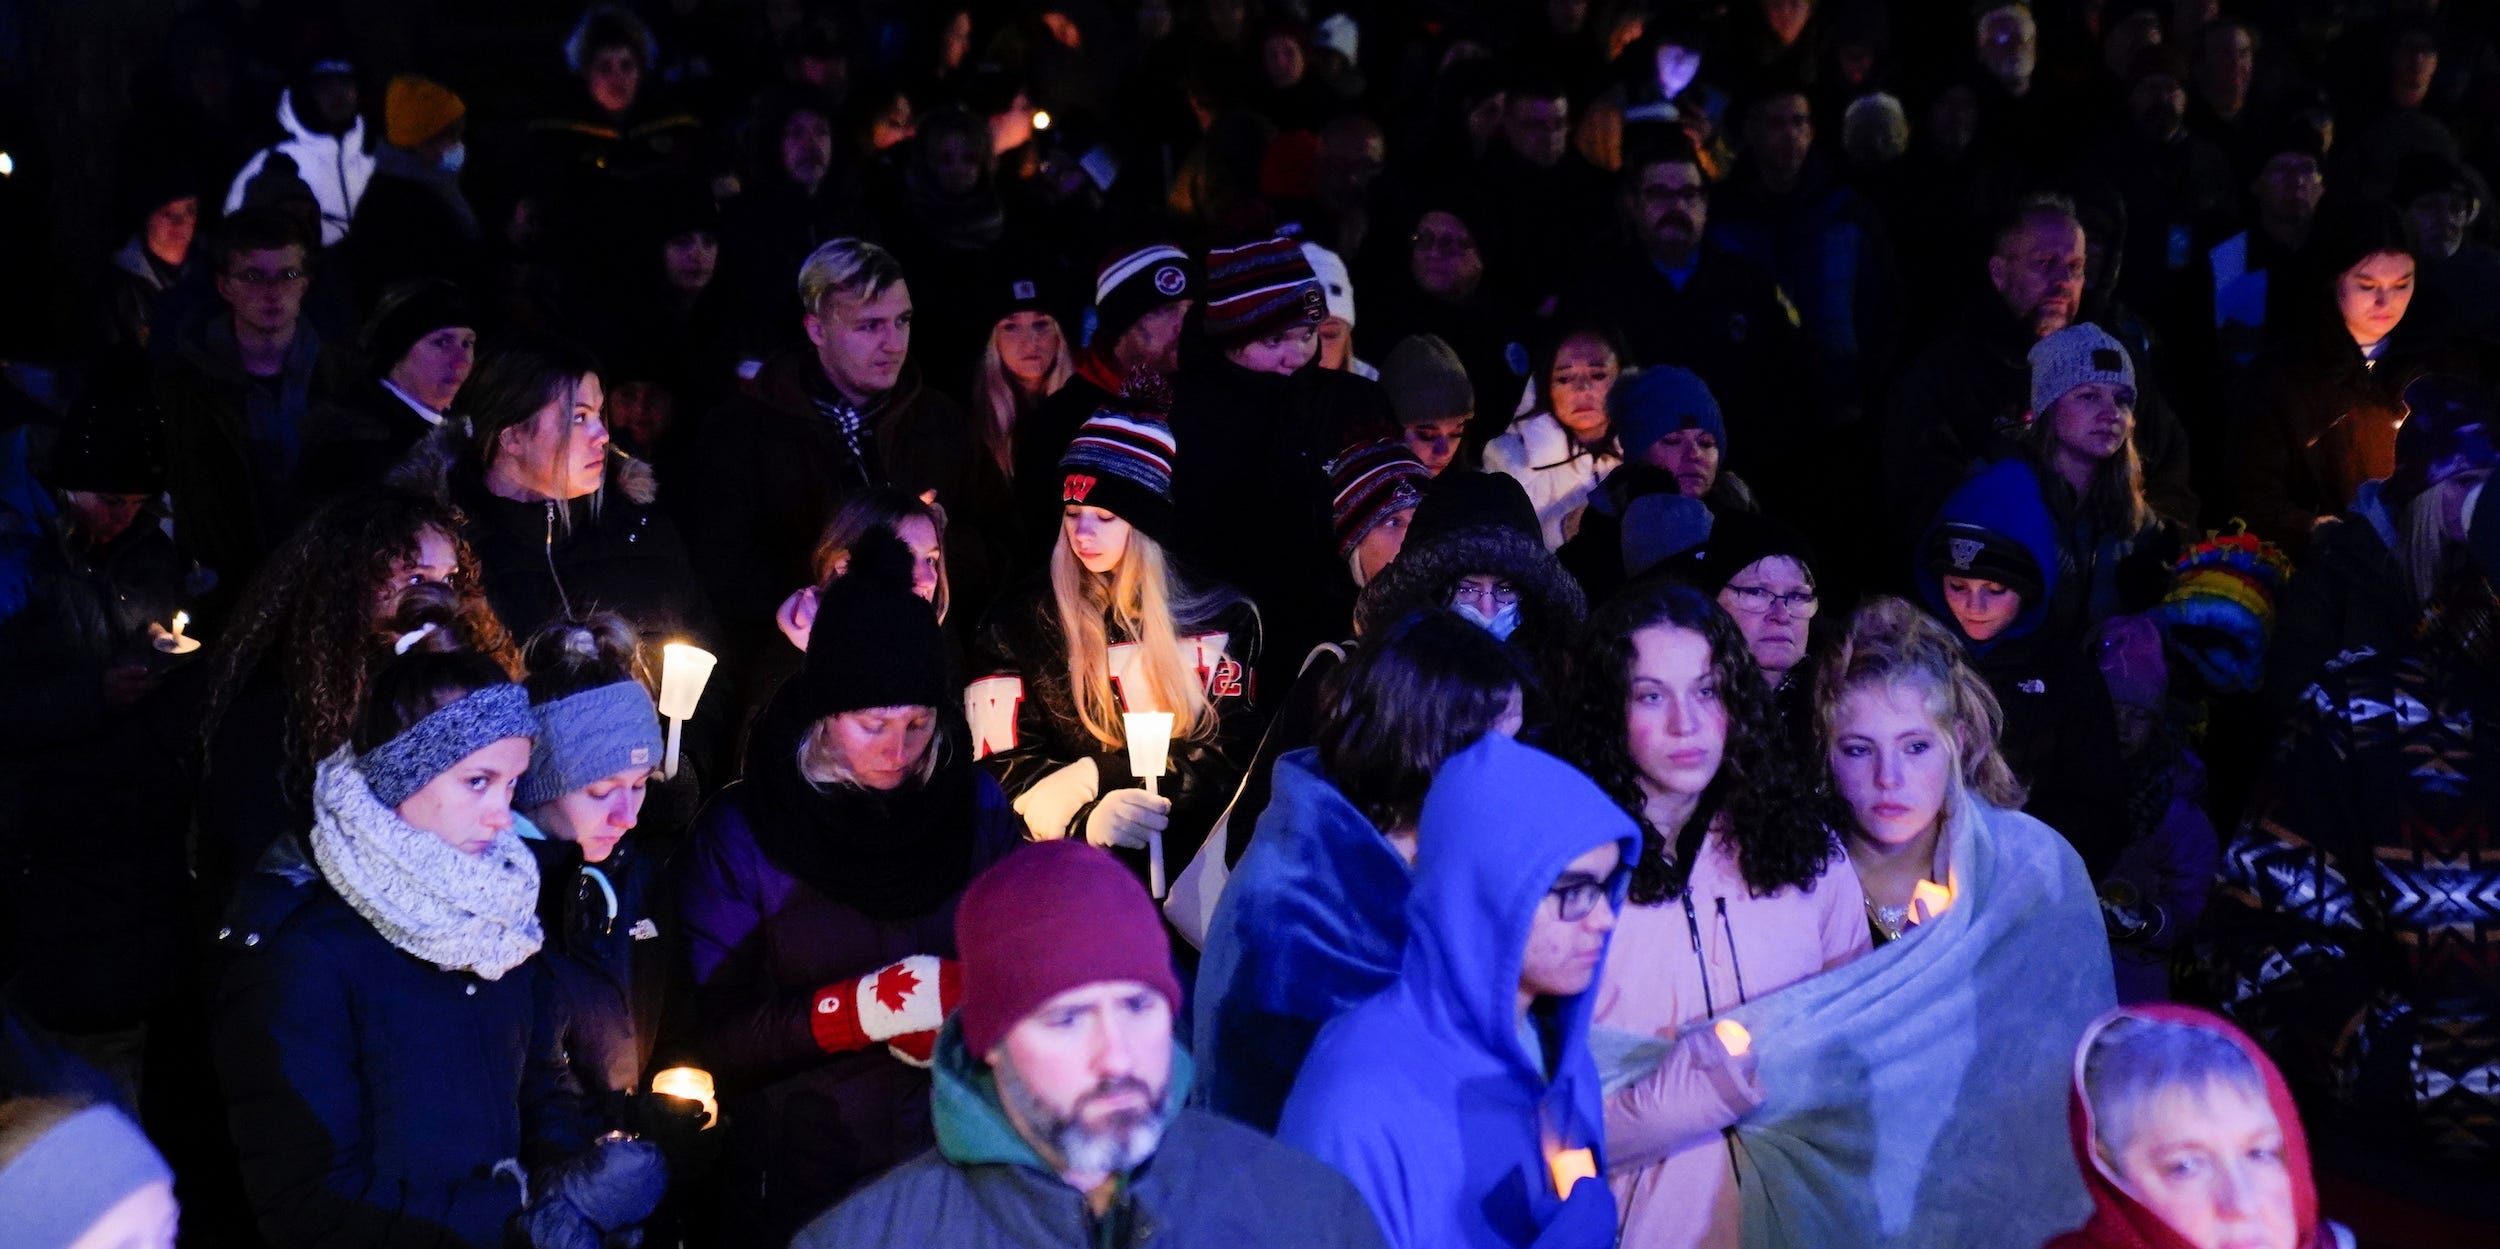 Community members mourn during a candle light vigil after a car plowed through a holiday parade in Waukesha, Wisconsin